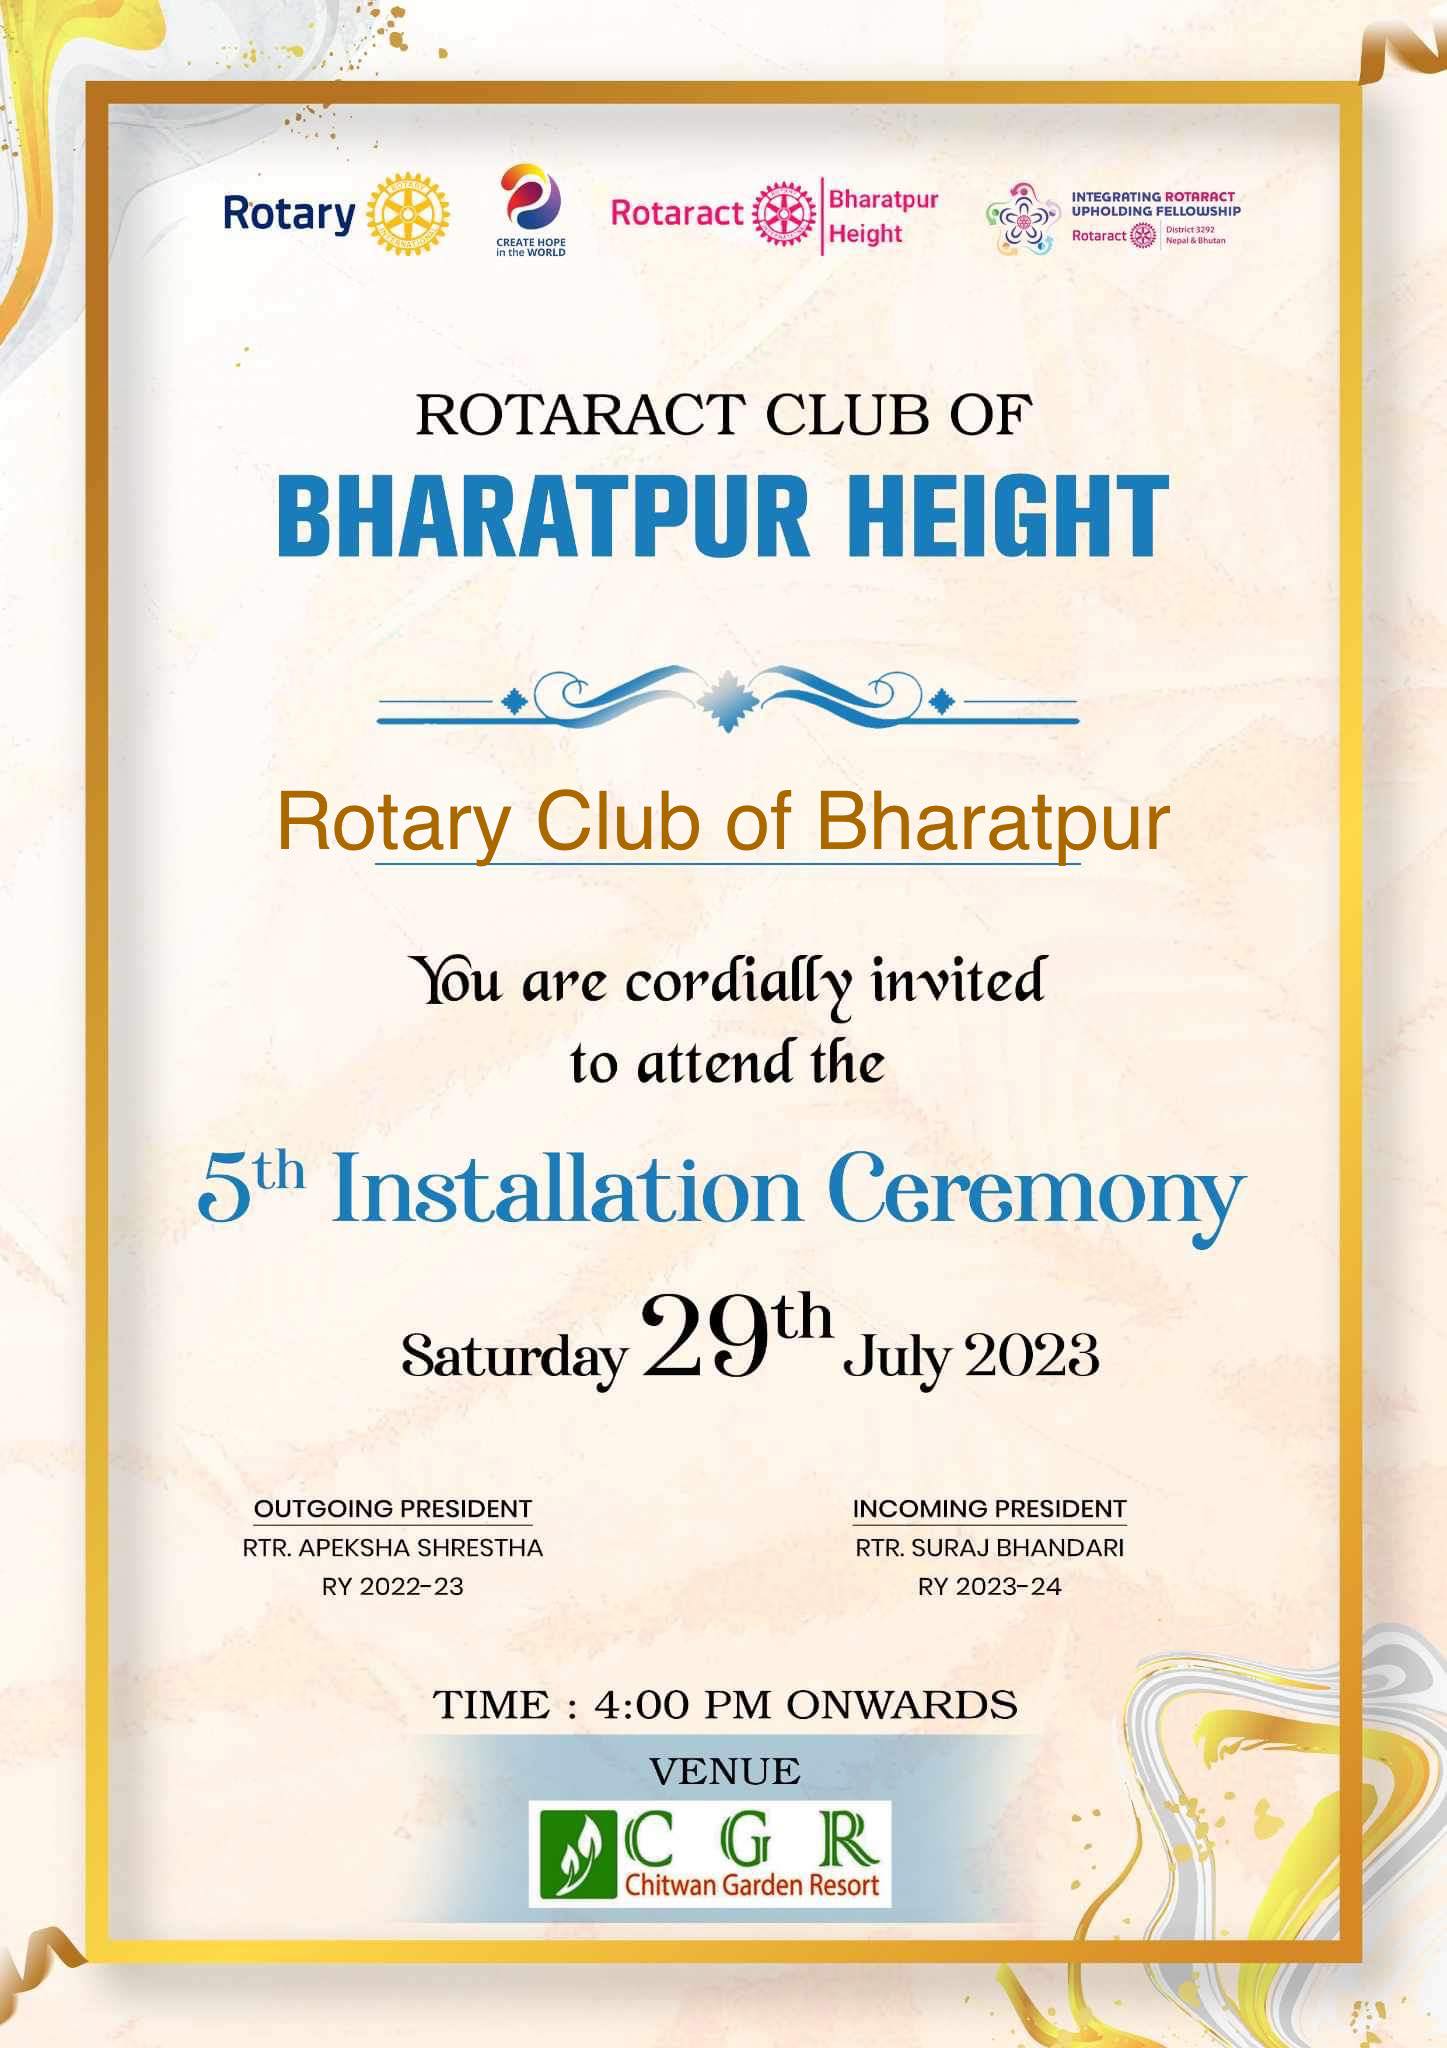 5th Installation ceremony of Rotaract Club of Bharatpur Height